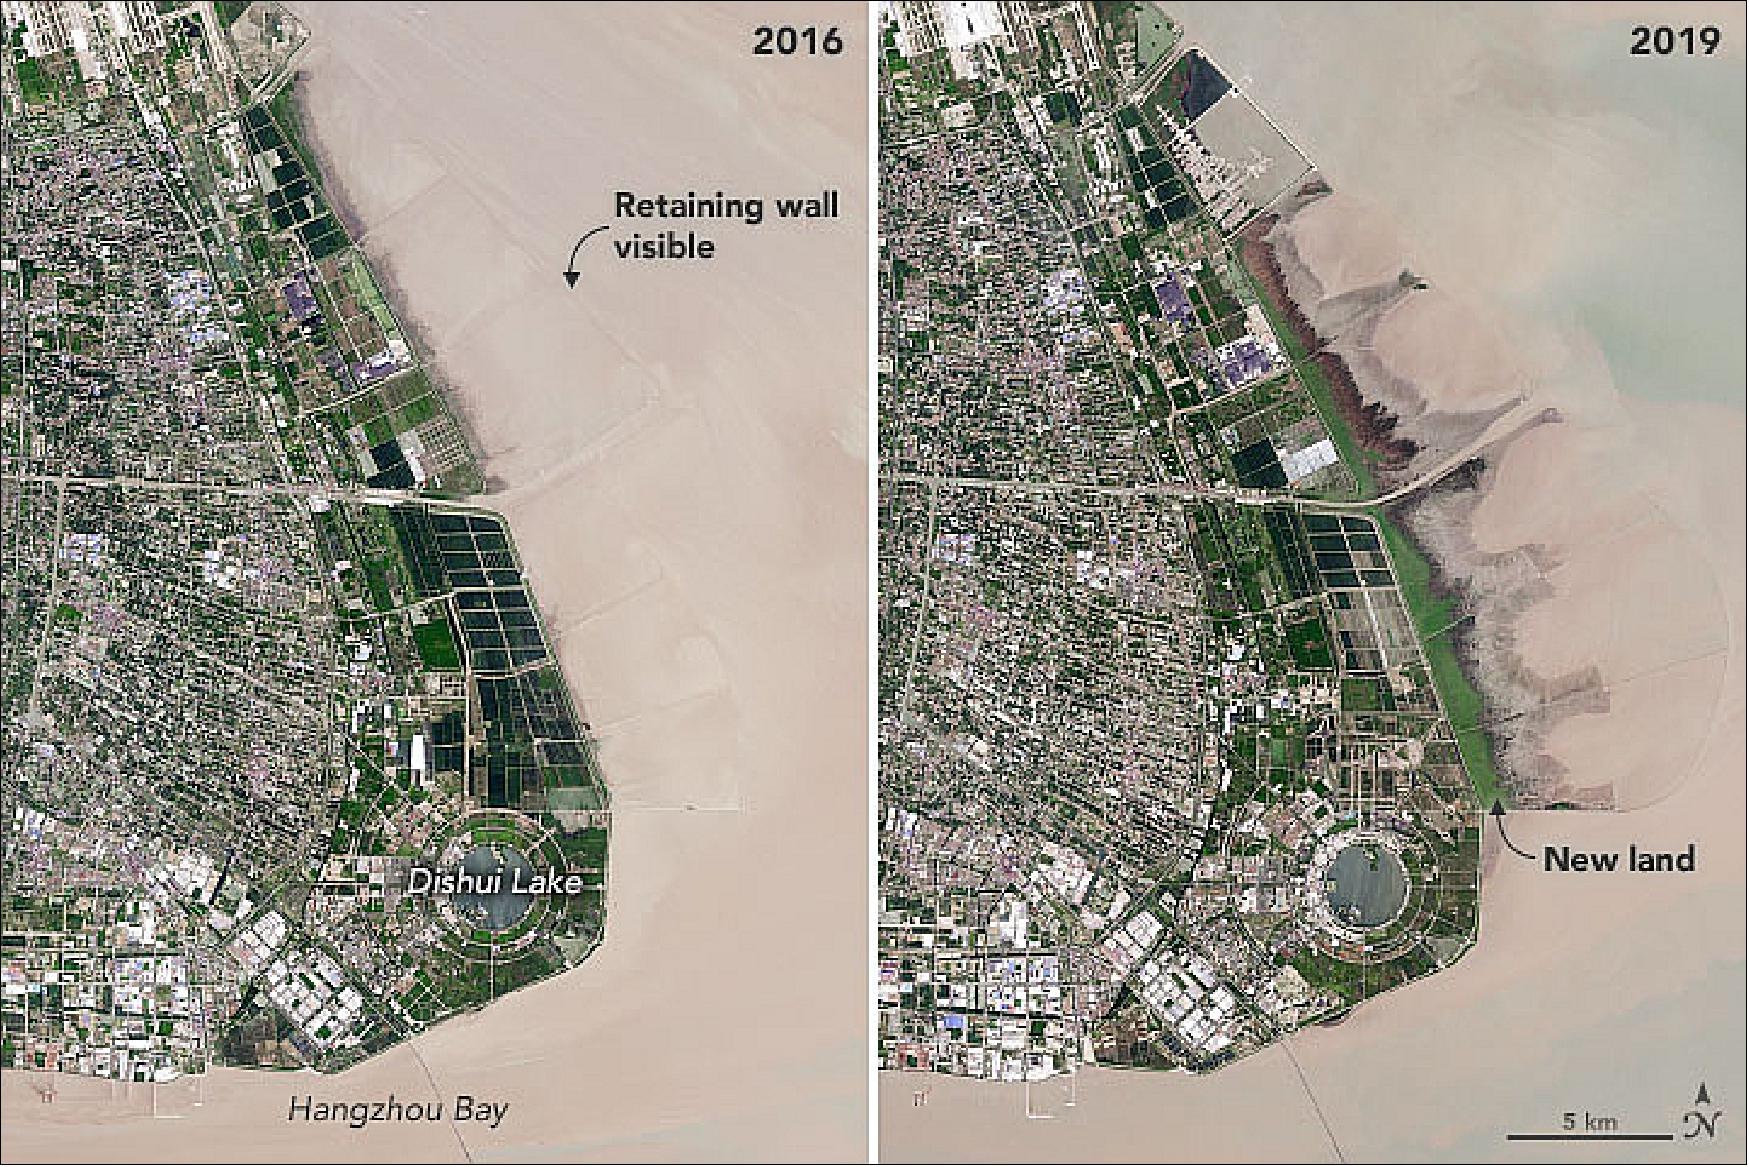 Figure 6: While reclaimed land is typically used for ports, industry, and housing, Shanghai stands out for devoting some of its new land to parks, forests, and wetlands. That tendency is visible in this pair of images from 2016 and 2019, acquired by the Operational Land Imager (OLI) on Landsat-8. Nanhui is a newly-built city in Pudong on Hangzhou Bay, about 60 km from downtown Shanghai (image credit: NASA Earth Observatory, images by Joshua Stevens, using Landsat data from the U.S. Geological Survey. Story by Adam Voiland)